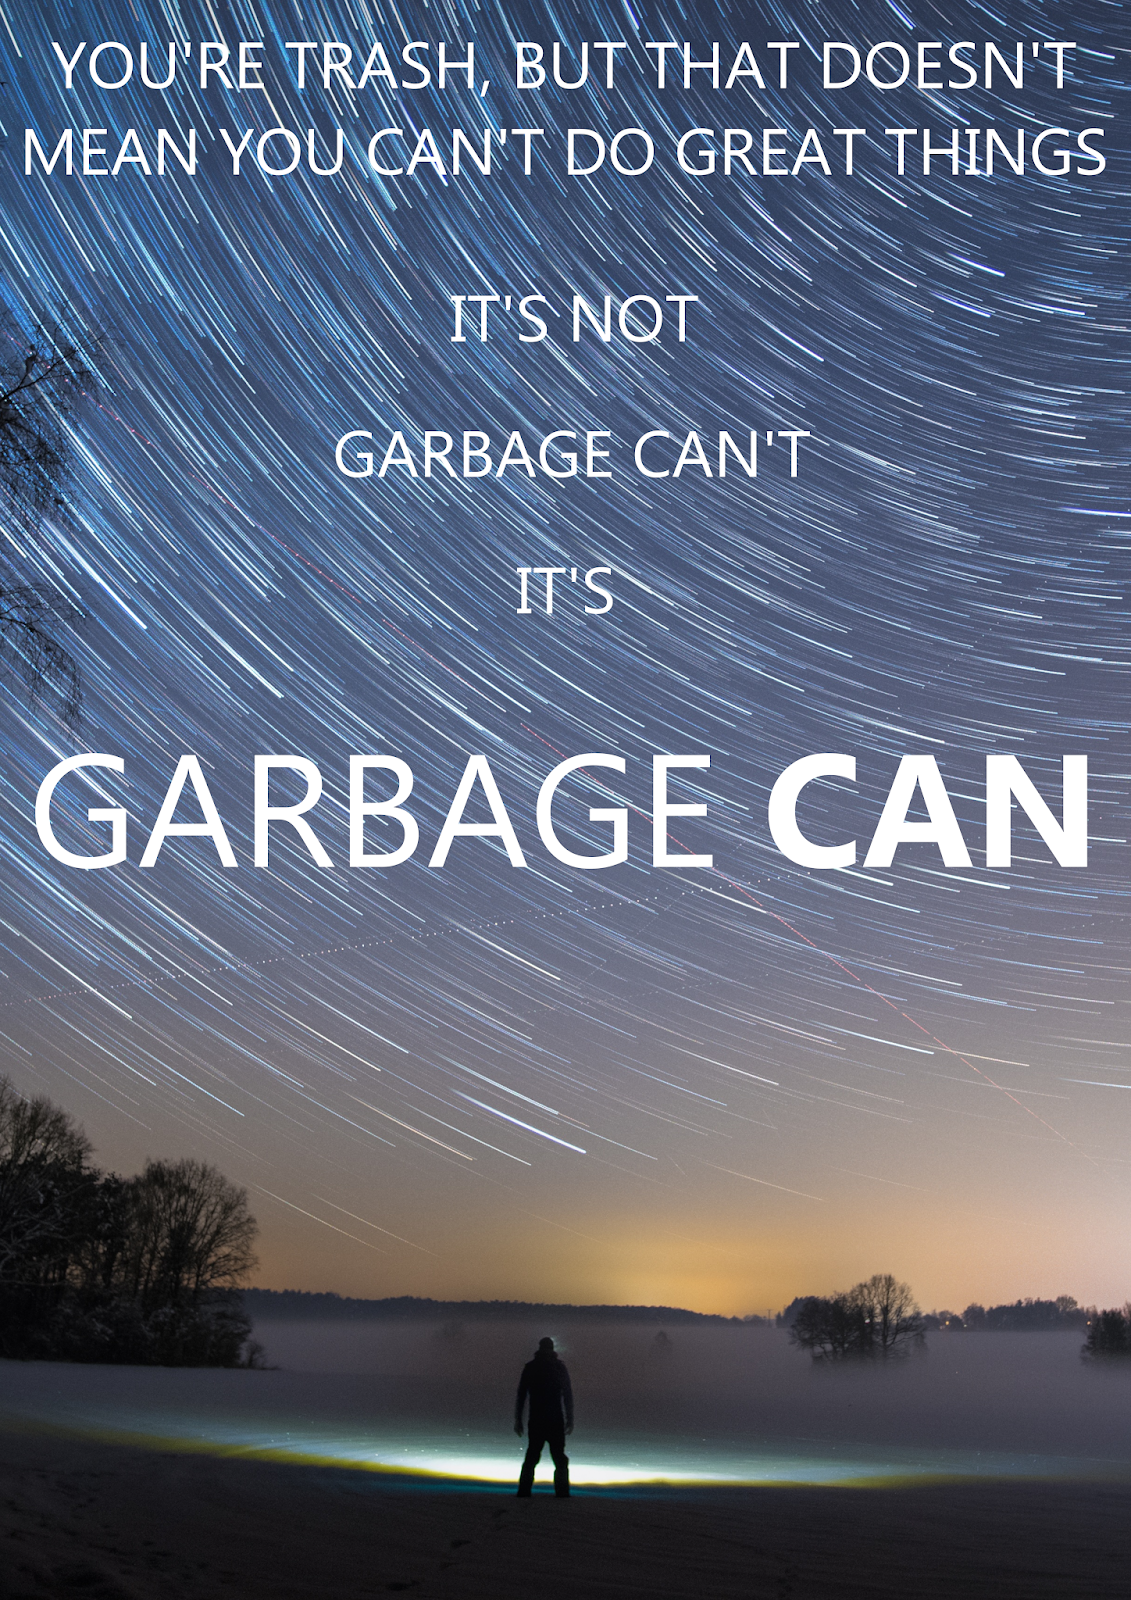 You're trash, but that doesn't mean you can't do great things. It's not garbage can't. It's GARBAGE CAN.